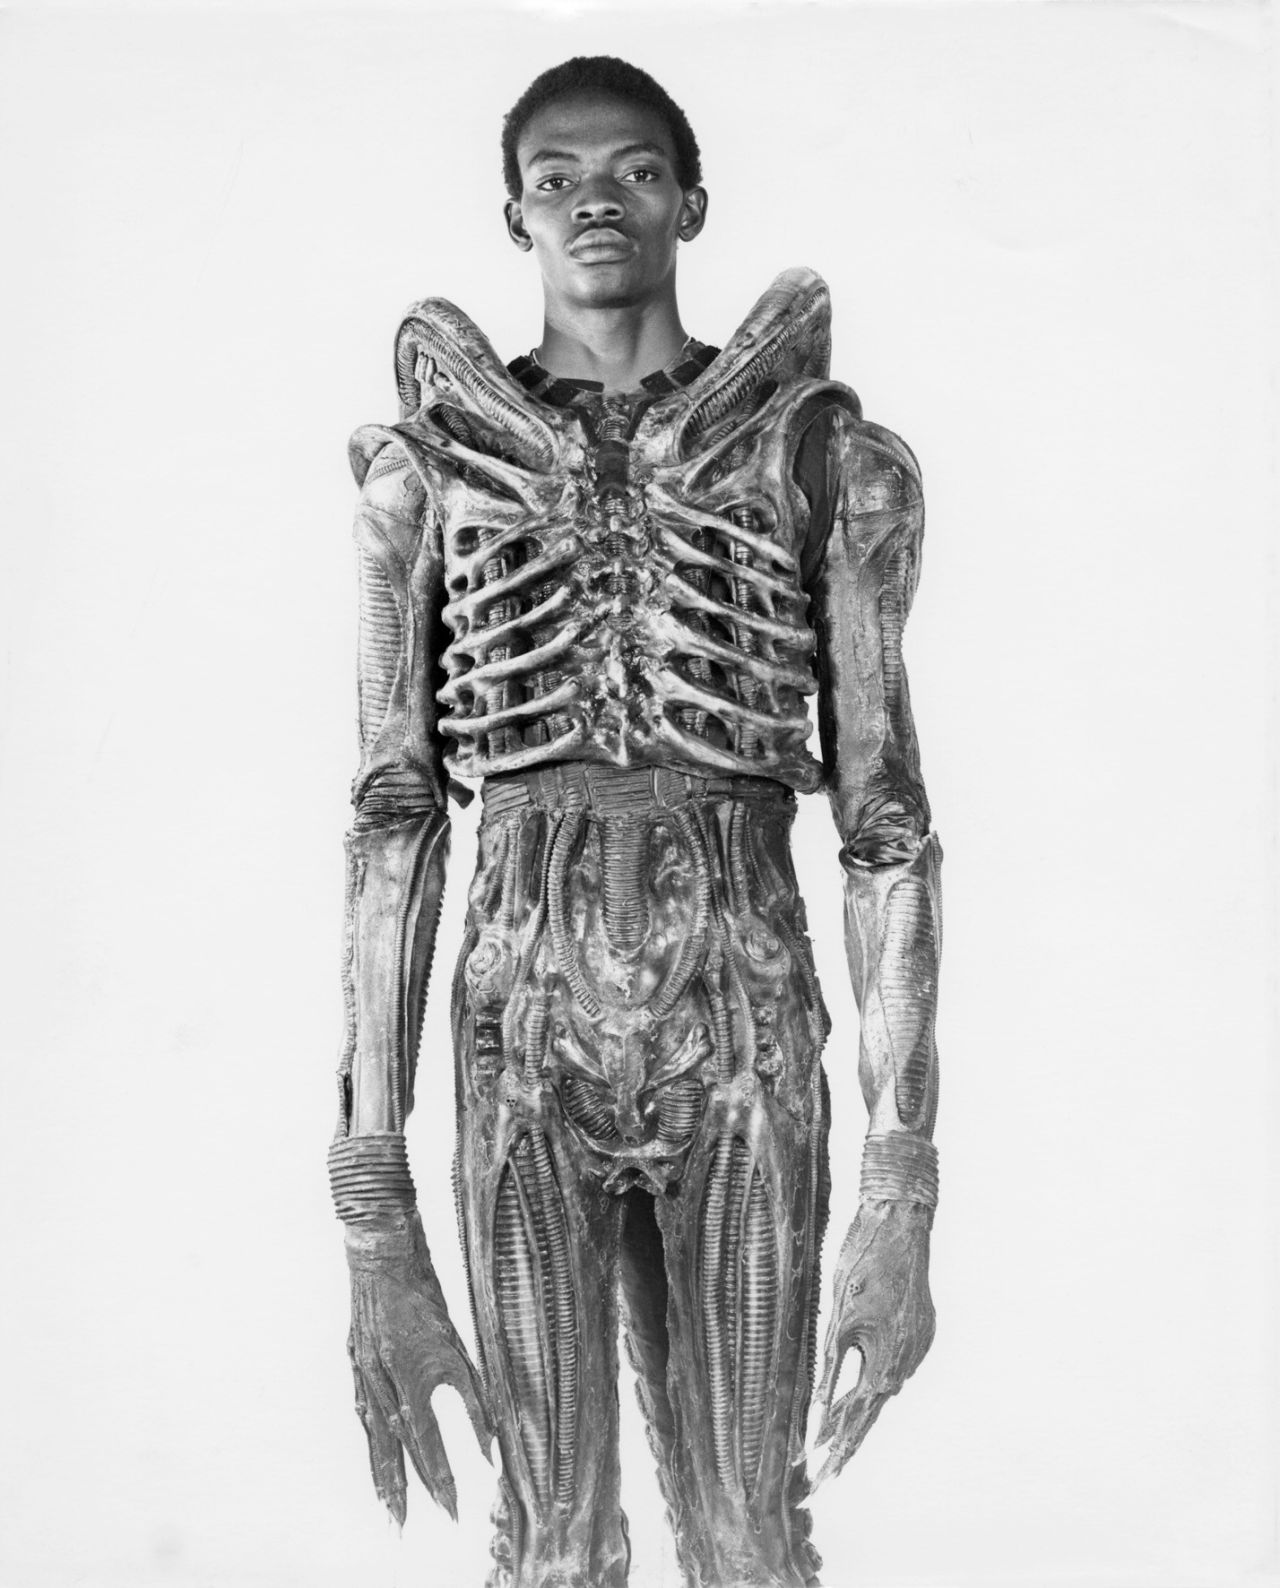 Bolaji Badejo became one of cinema's most feared villains almost by accident. After a lengthy casting process, agent Peter Ardram came across Badejo in a pub in London. Thinking that the 6'10" Nigerian matched the thin, insect-like profile director Ridley Scott required, he arranged for the two to meet. (Image: courtesy<a href="http://www.mikesibthorp.com/" target="_blank" target="_blank"> Mike Sidthorp</a>.)